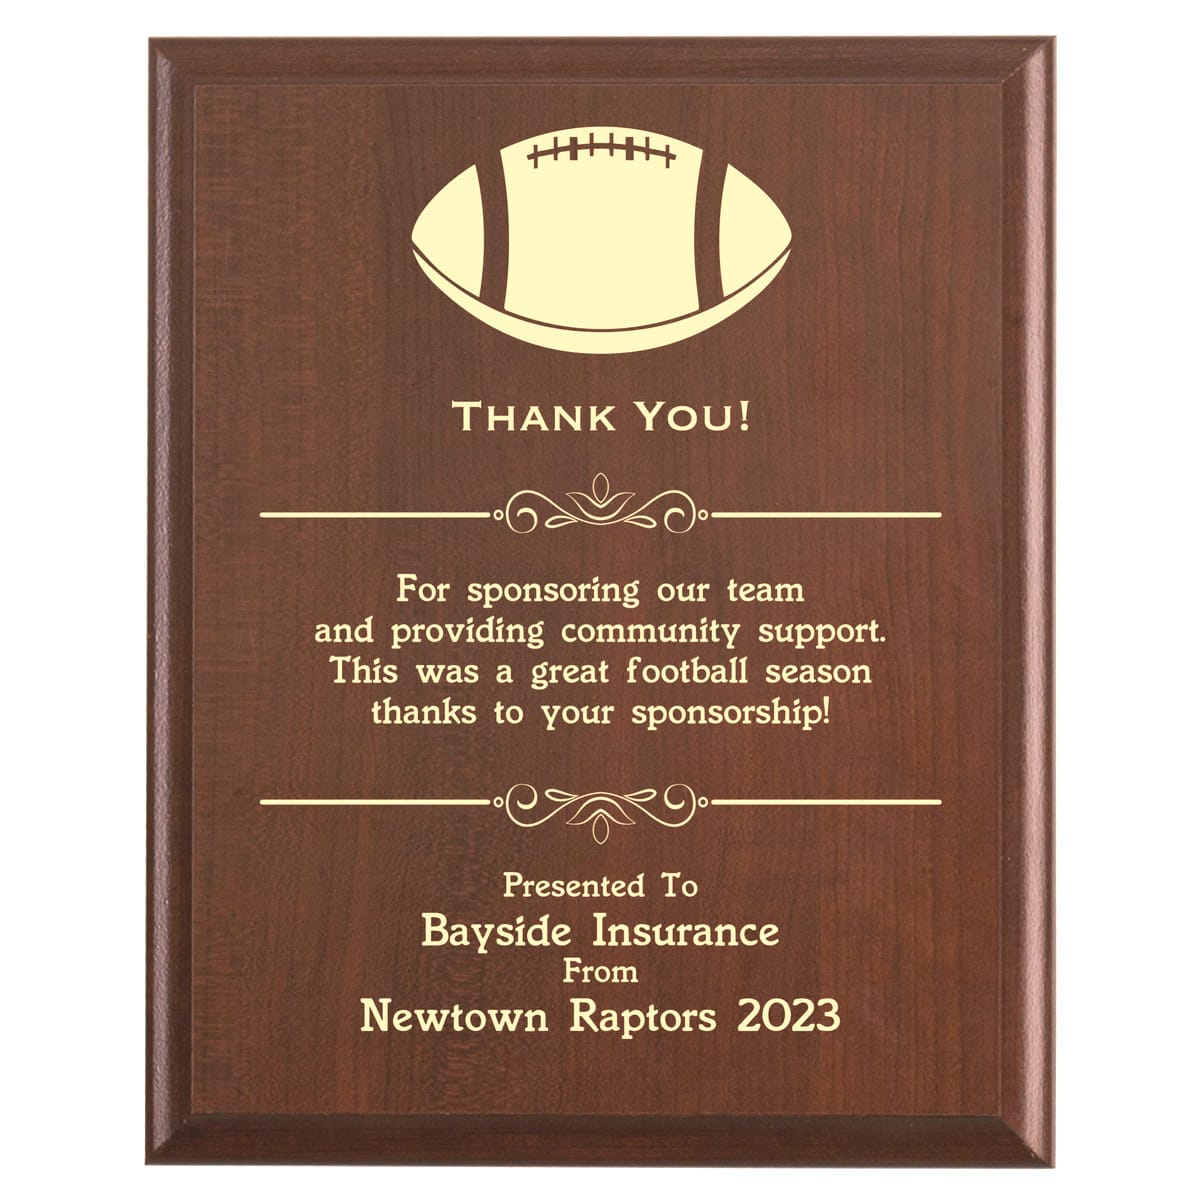 Football Sponsor Thank You Gift | Sponsorship Award Plaque from the ...